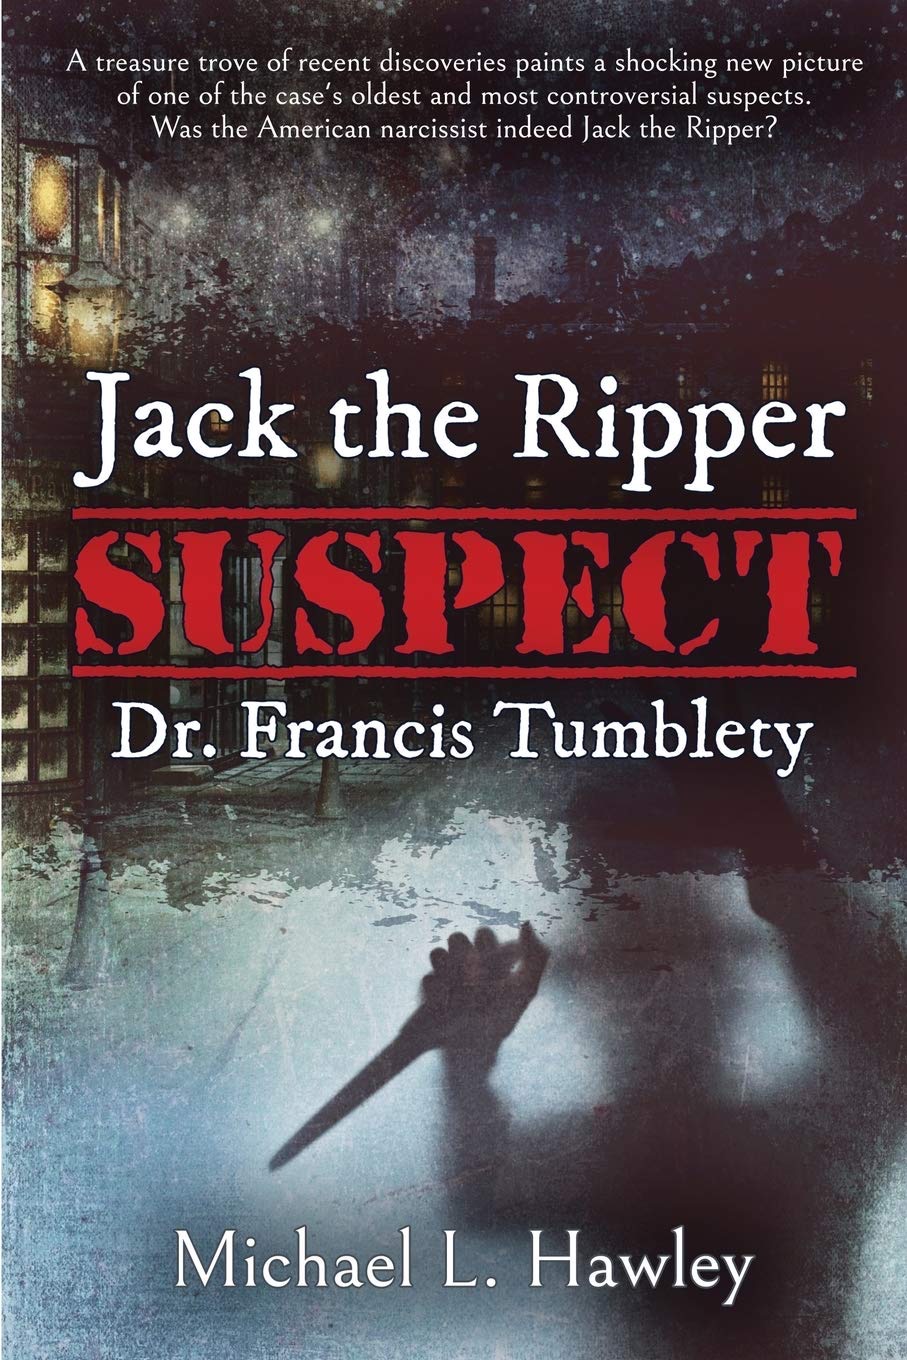 inspired-by-spirits-dr-tumbletys-pittsburgh-pa-jack-the-ripper-suspect-michael-hawley-dr.francis-tumblety